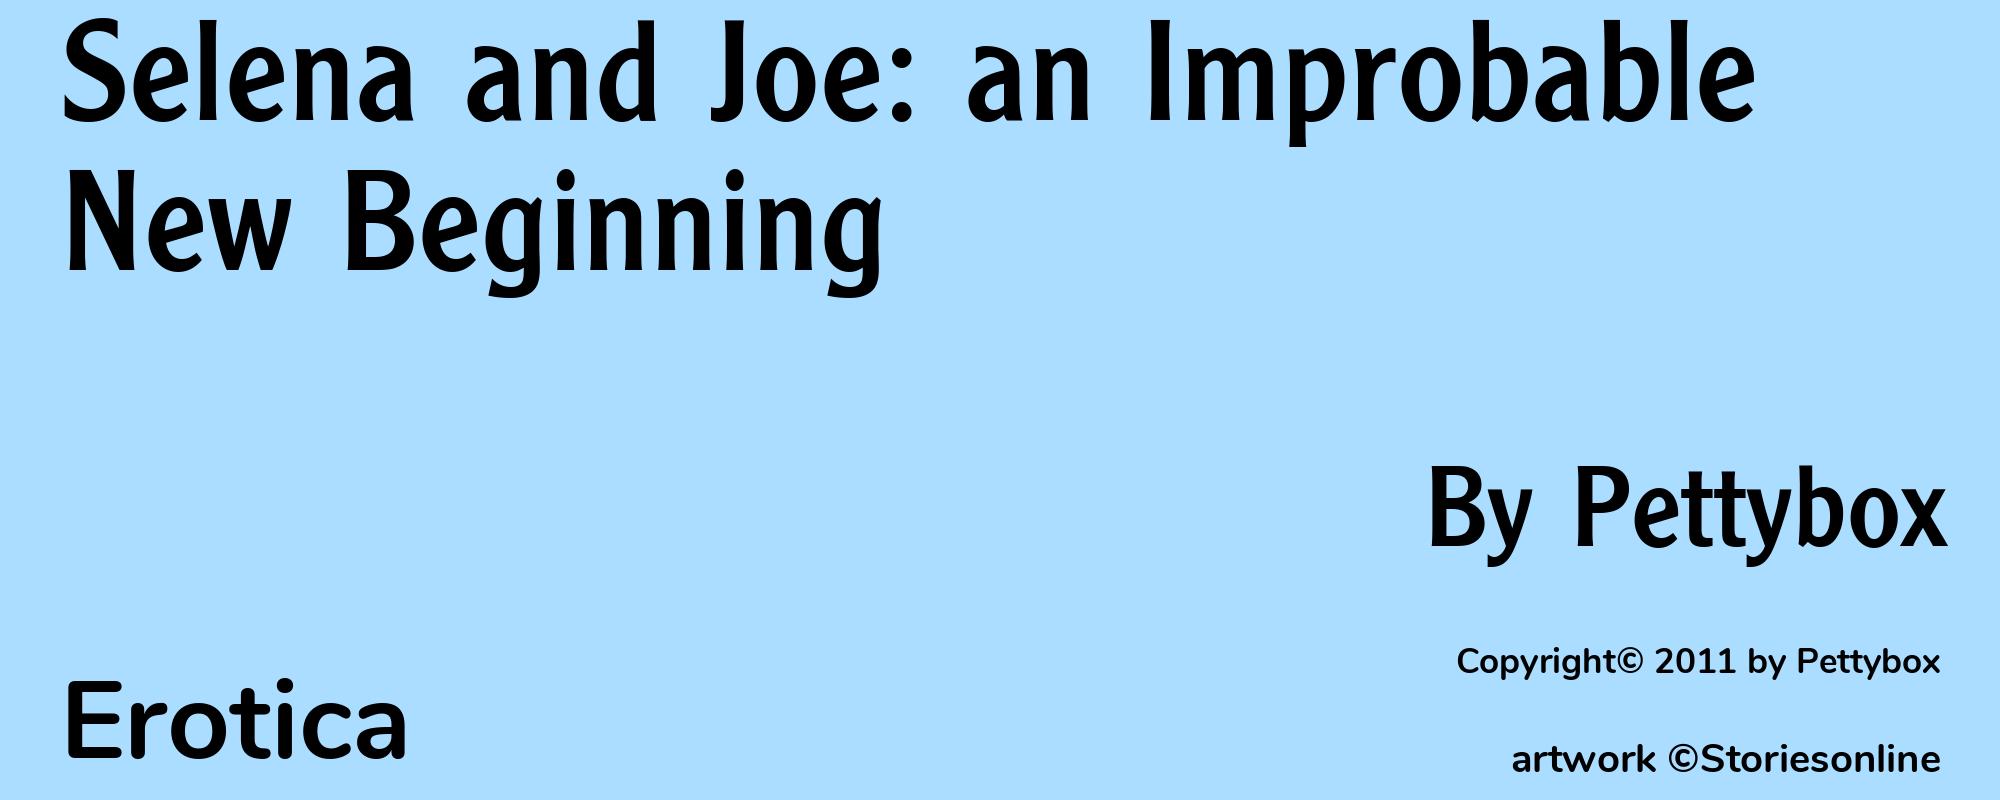 Selena and Joe: an Improbable New Beginning - Cover